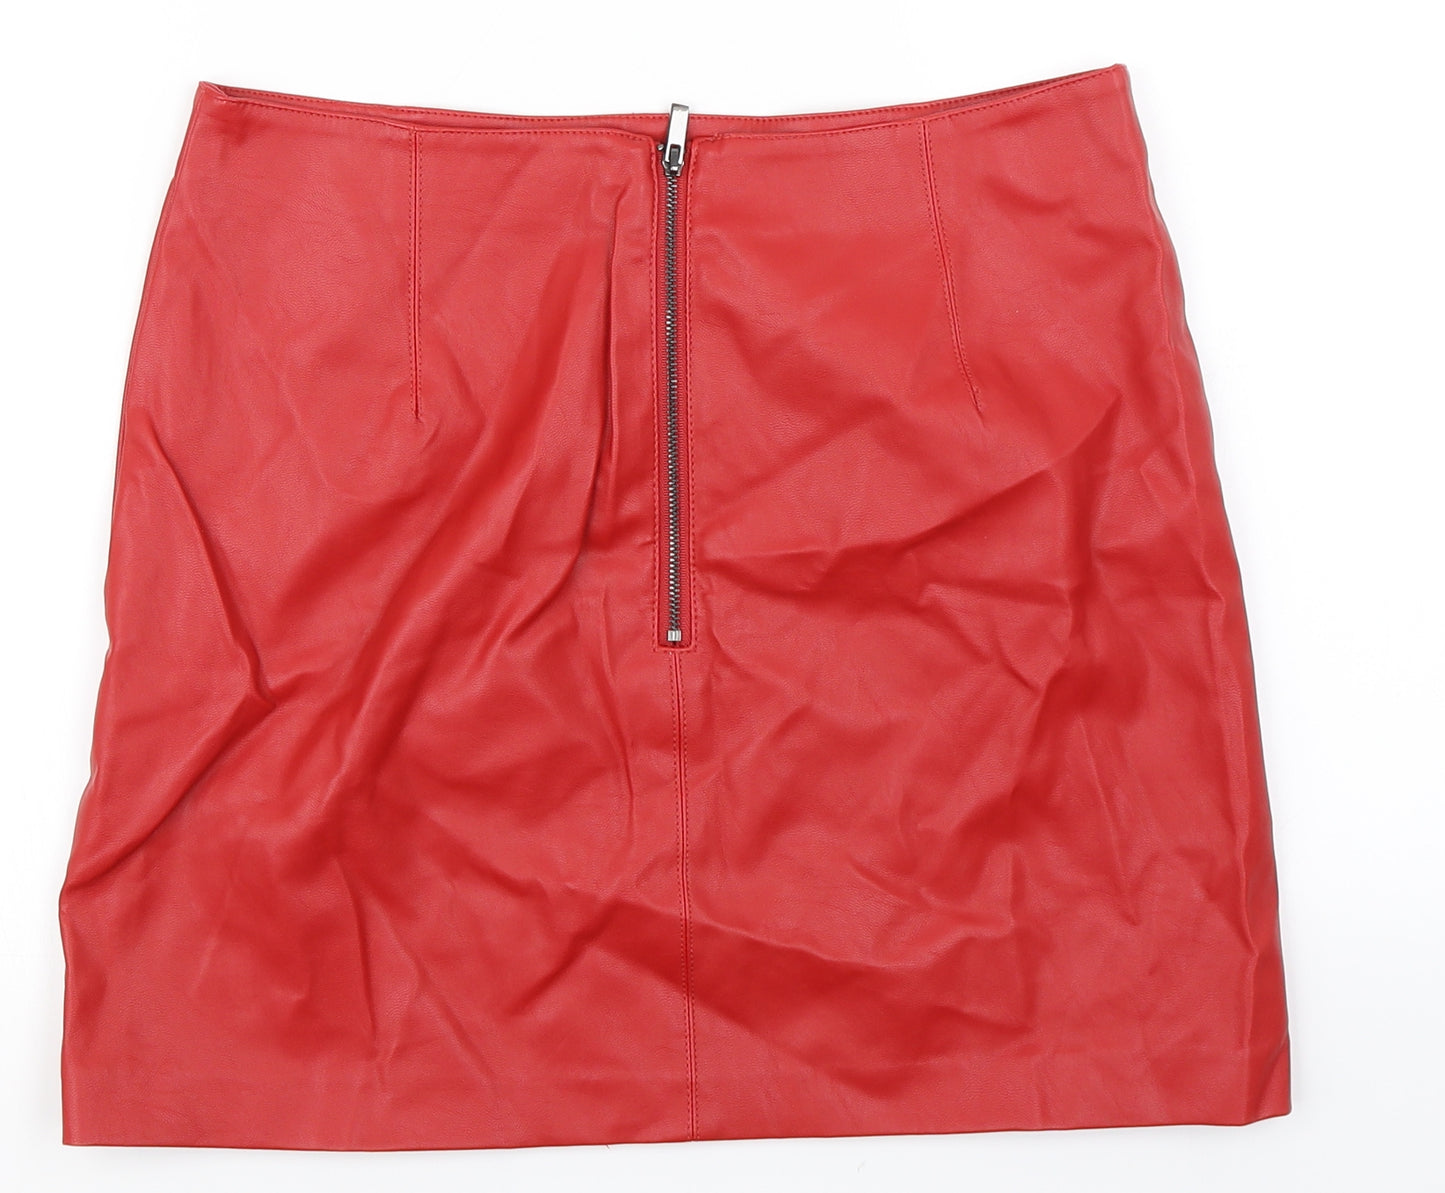 Oasis Womens Red   A-Line Skirt Size 10